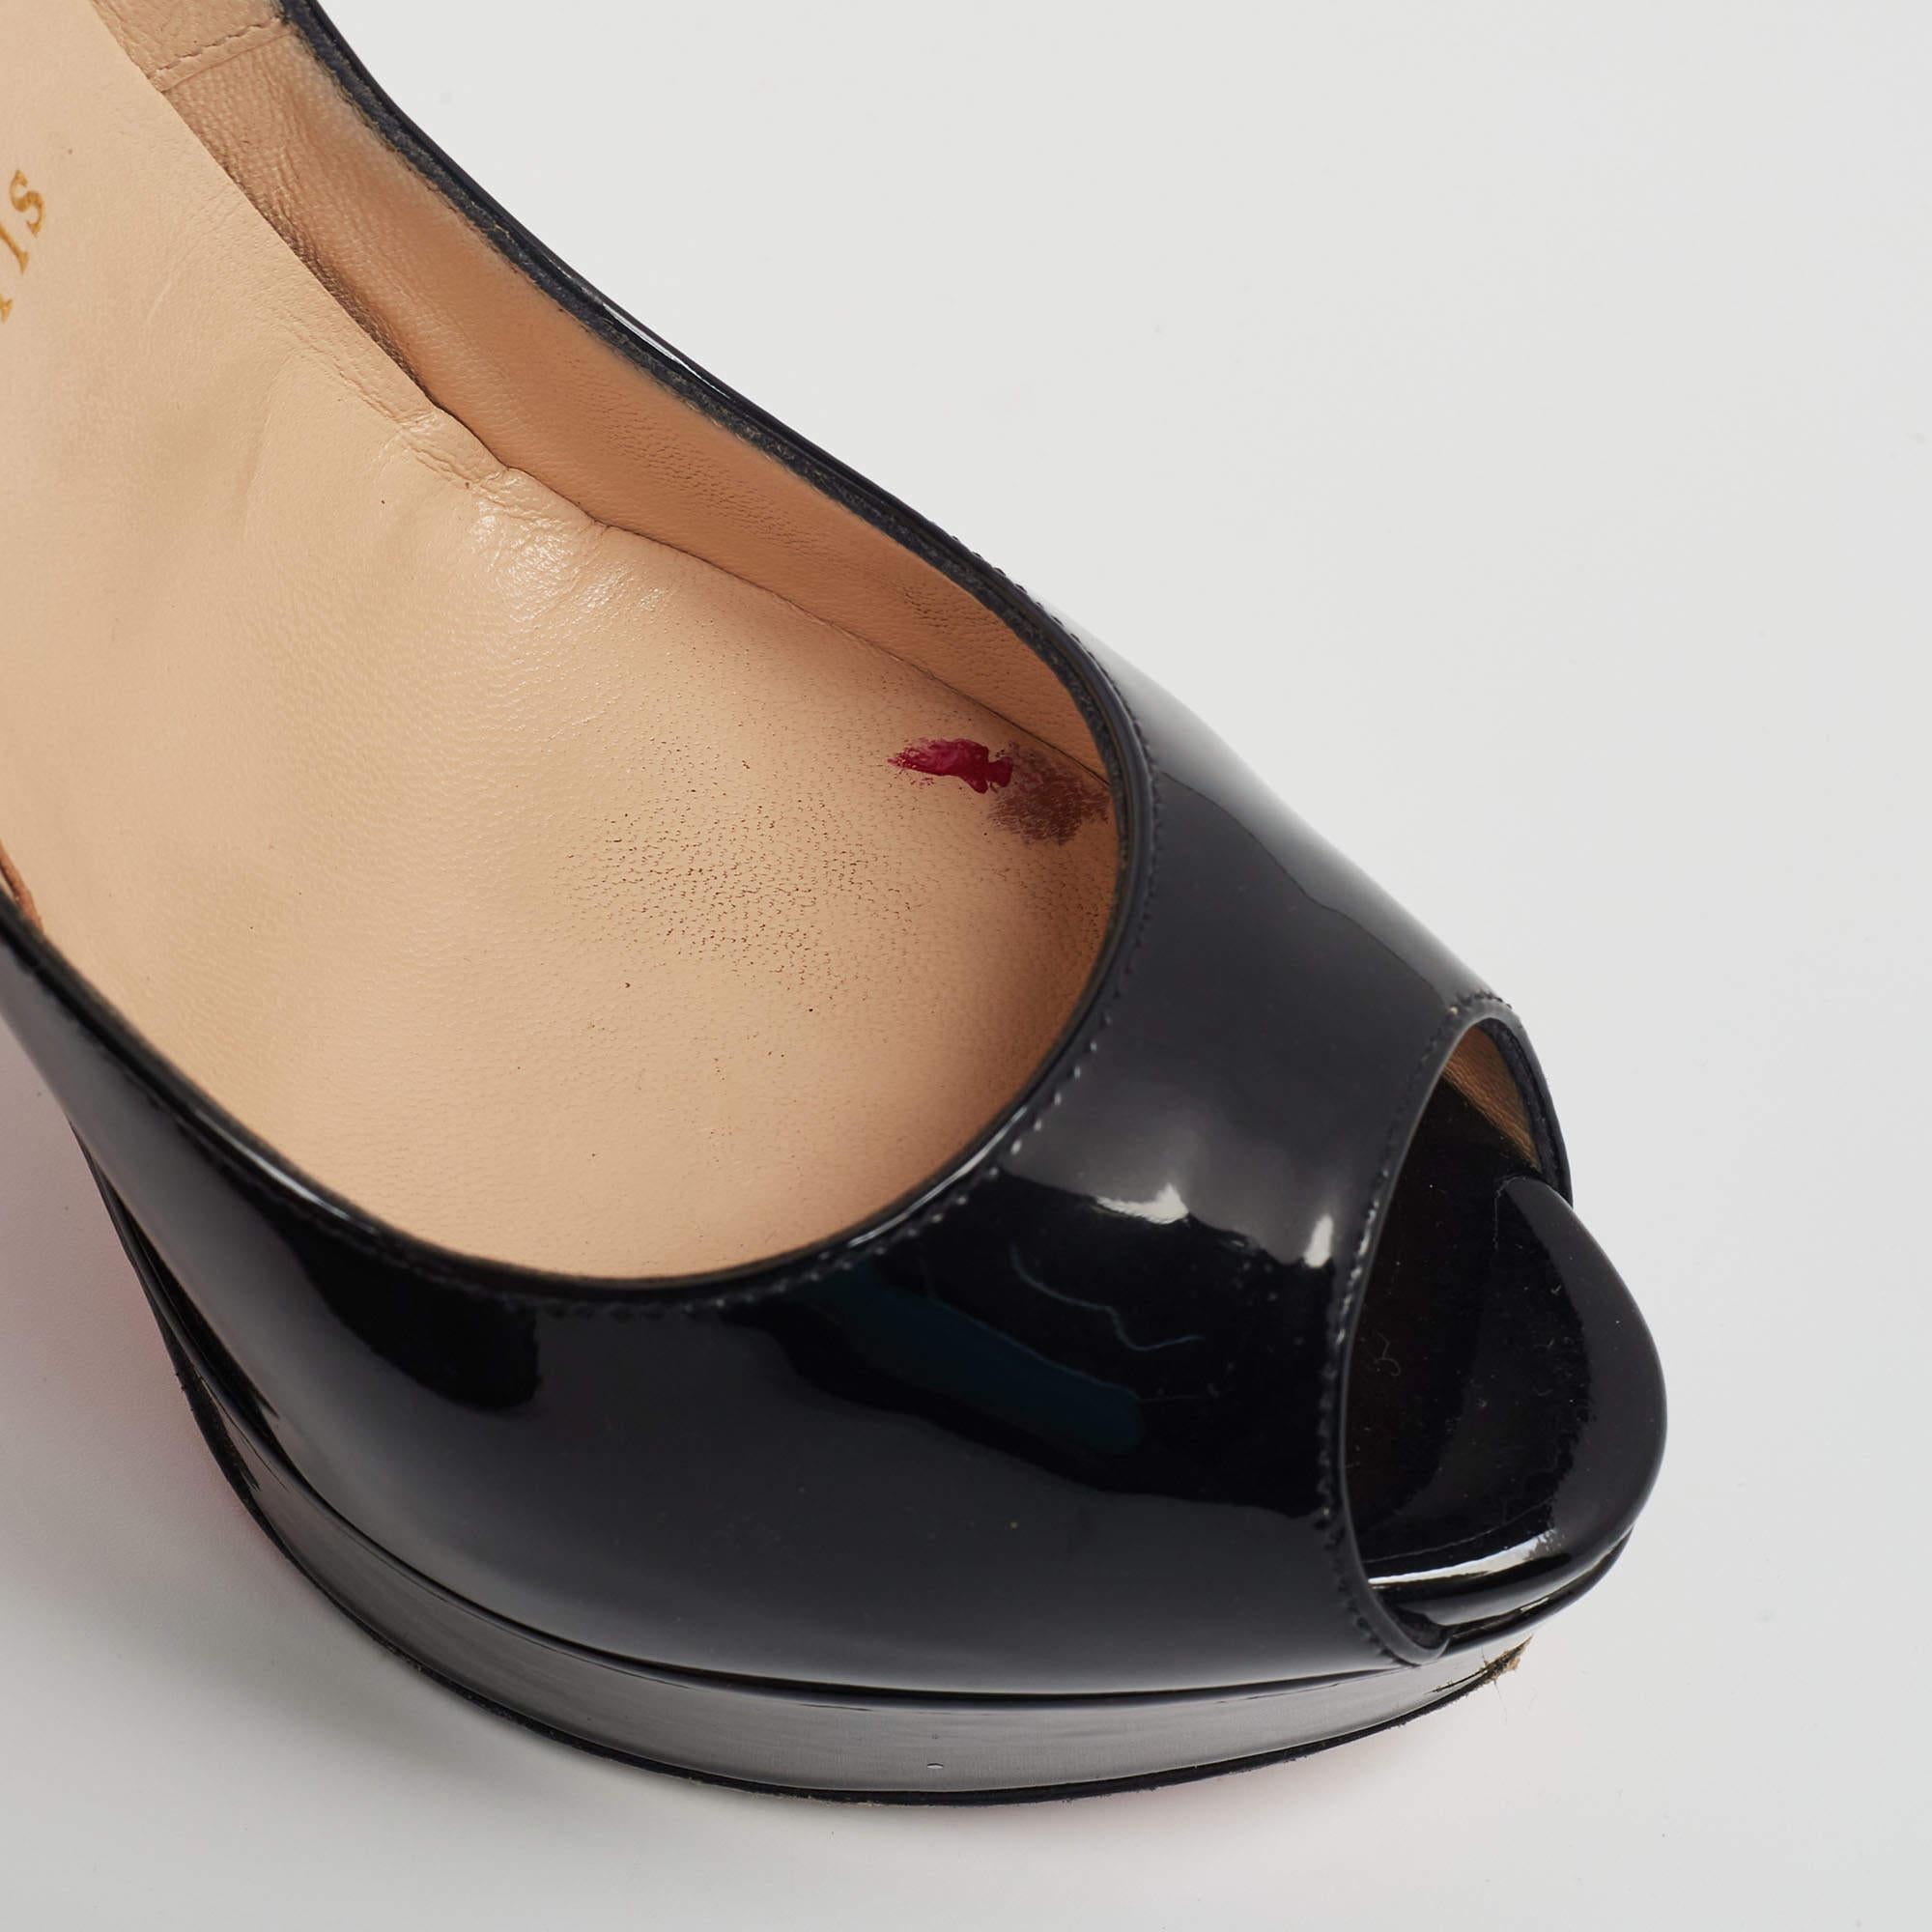 Christian Louboutin Black Patent Leather Lady Peep-Toe Pumps Size 38 For Sale 1